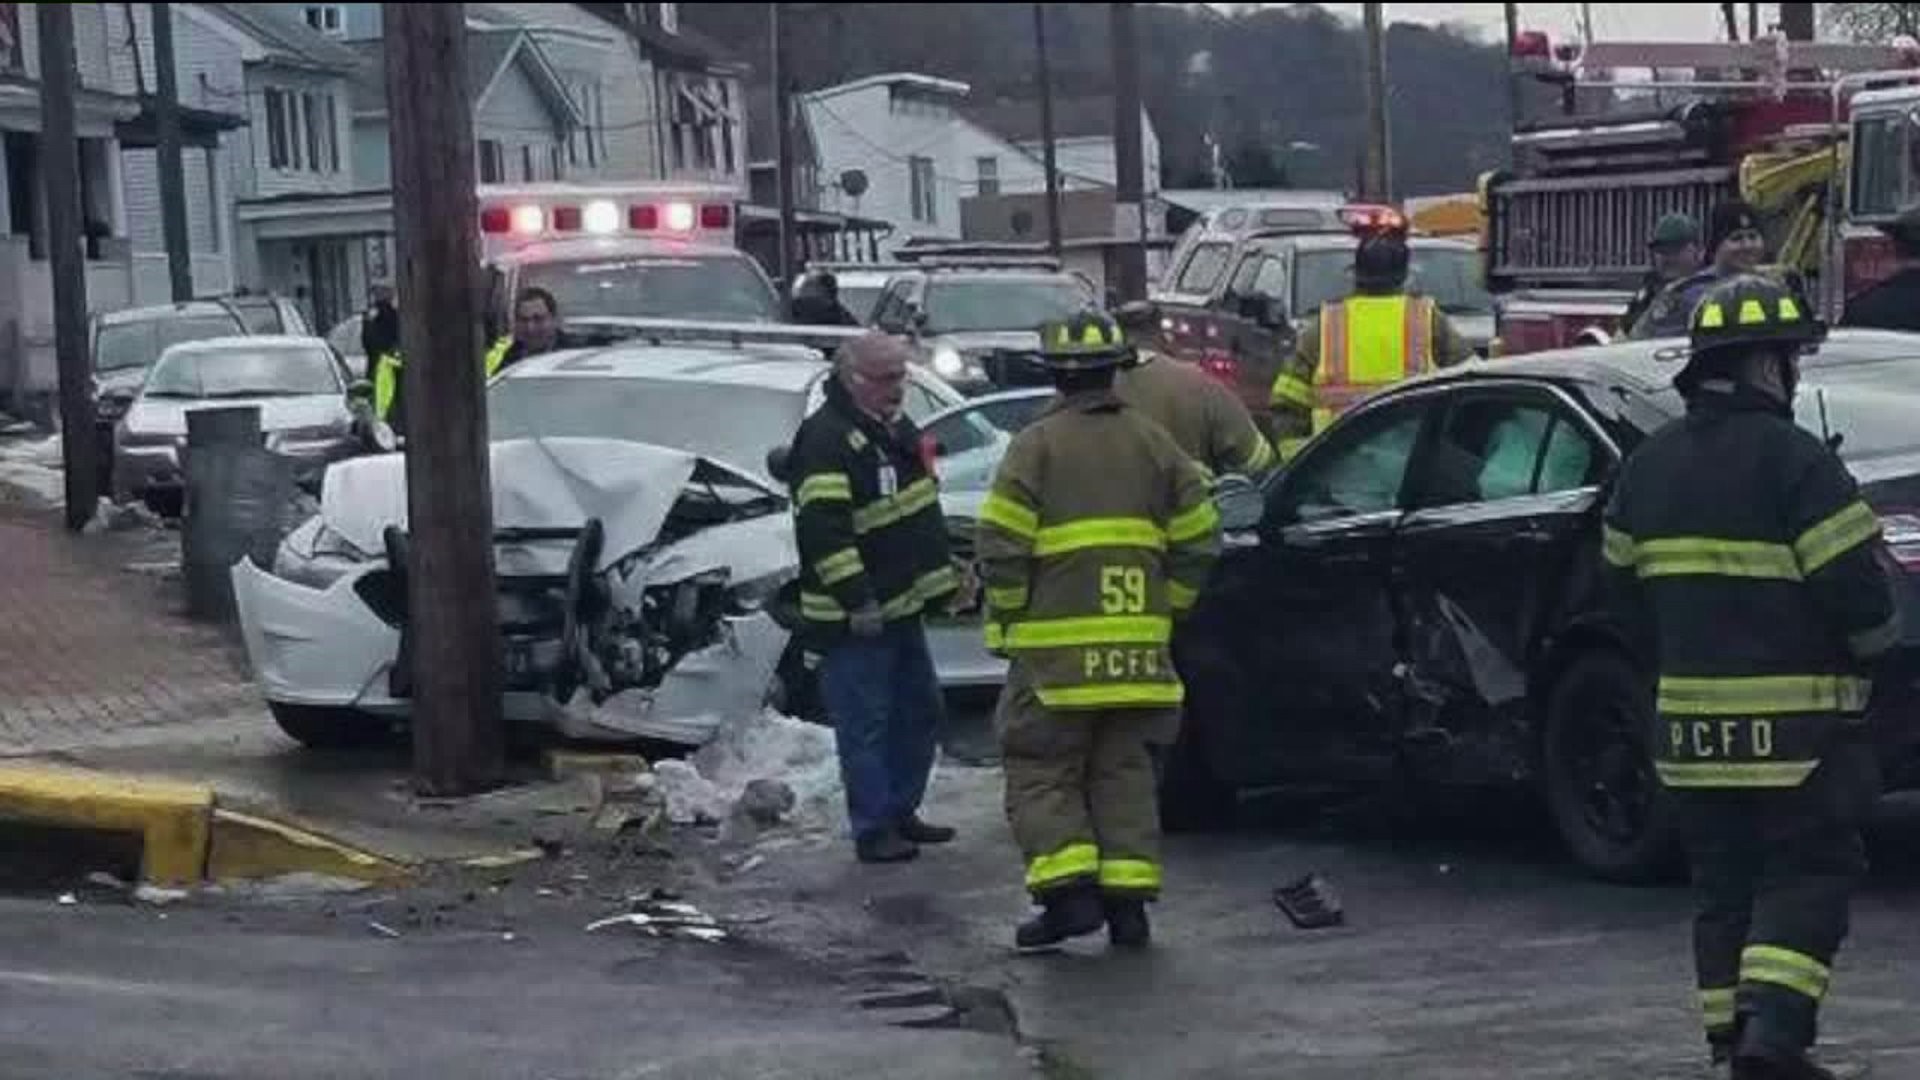 Two Police Cars Crash After Chase in Schuylkill County